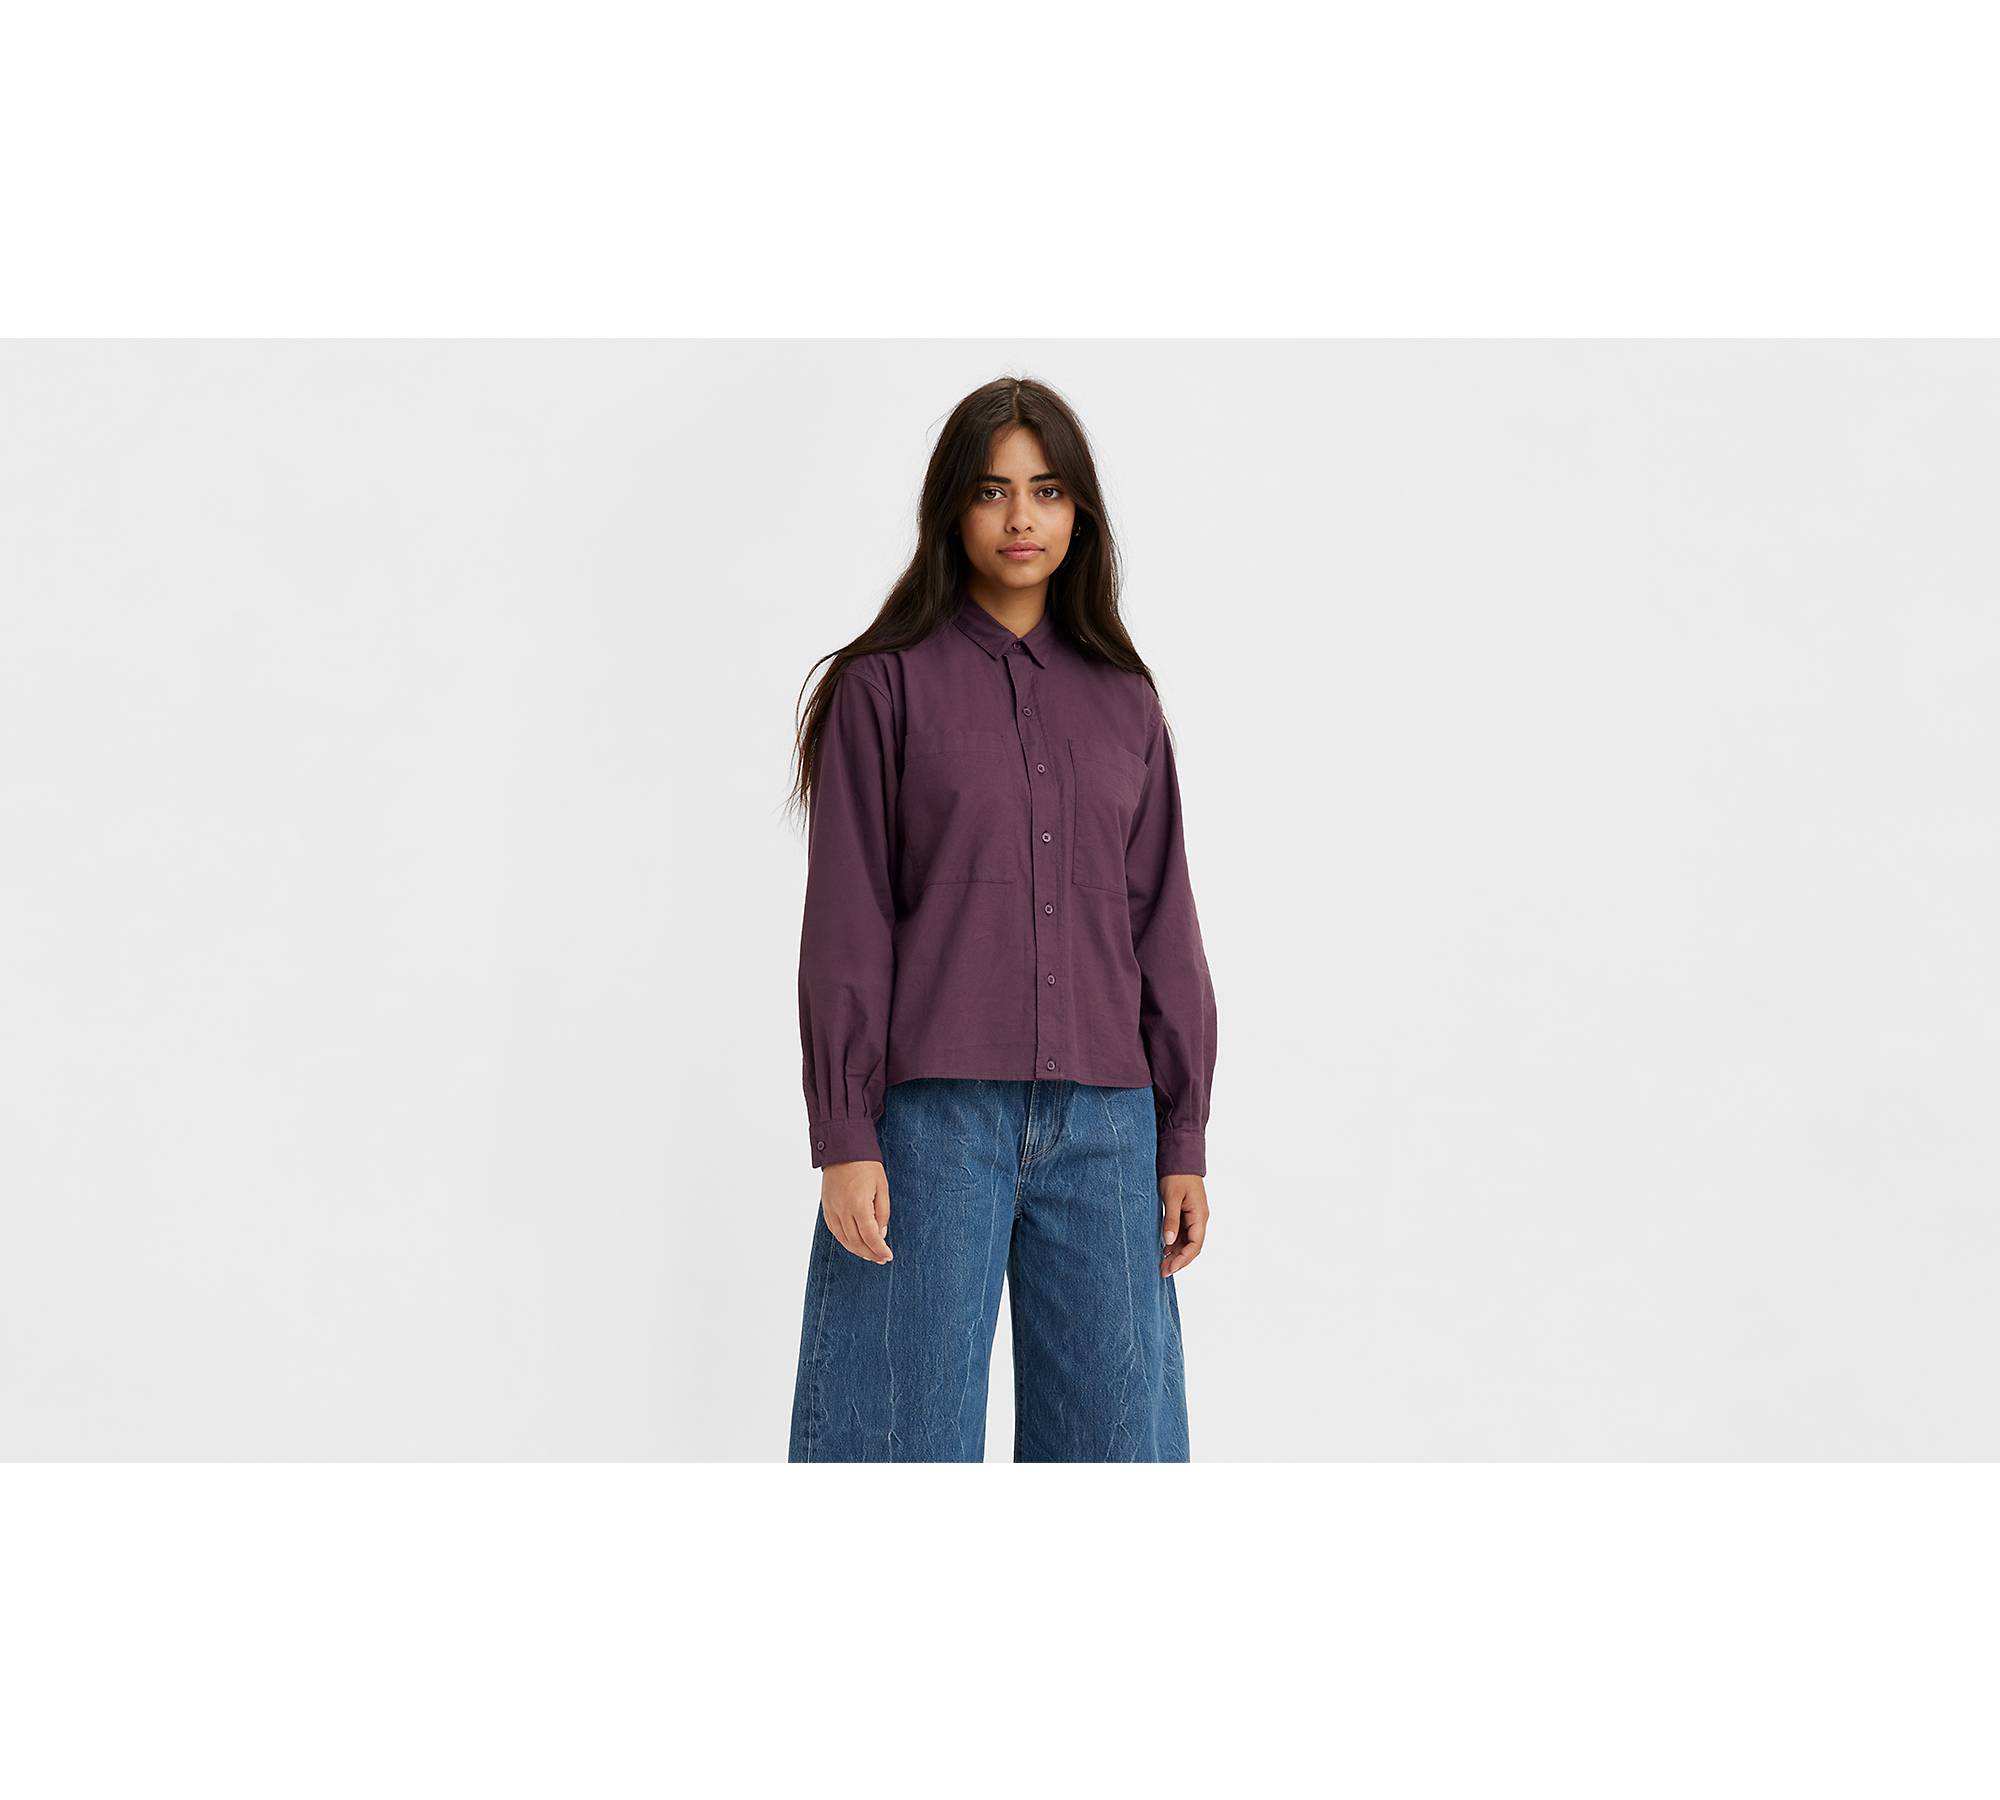 Aubergine Wide Leg Pants in Wr Tumbled Cotton